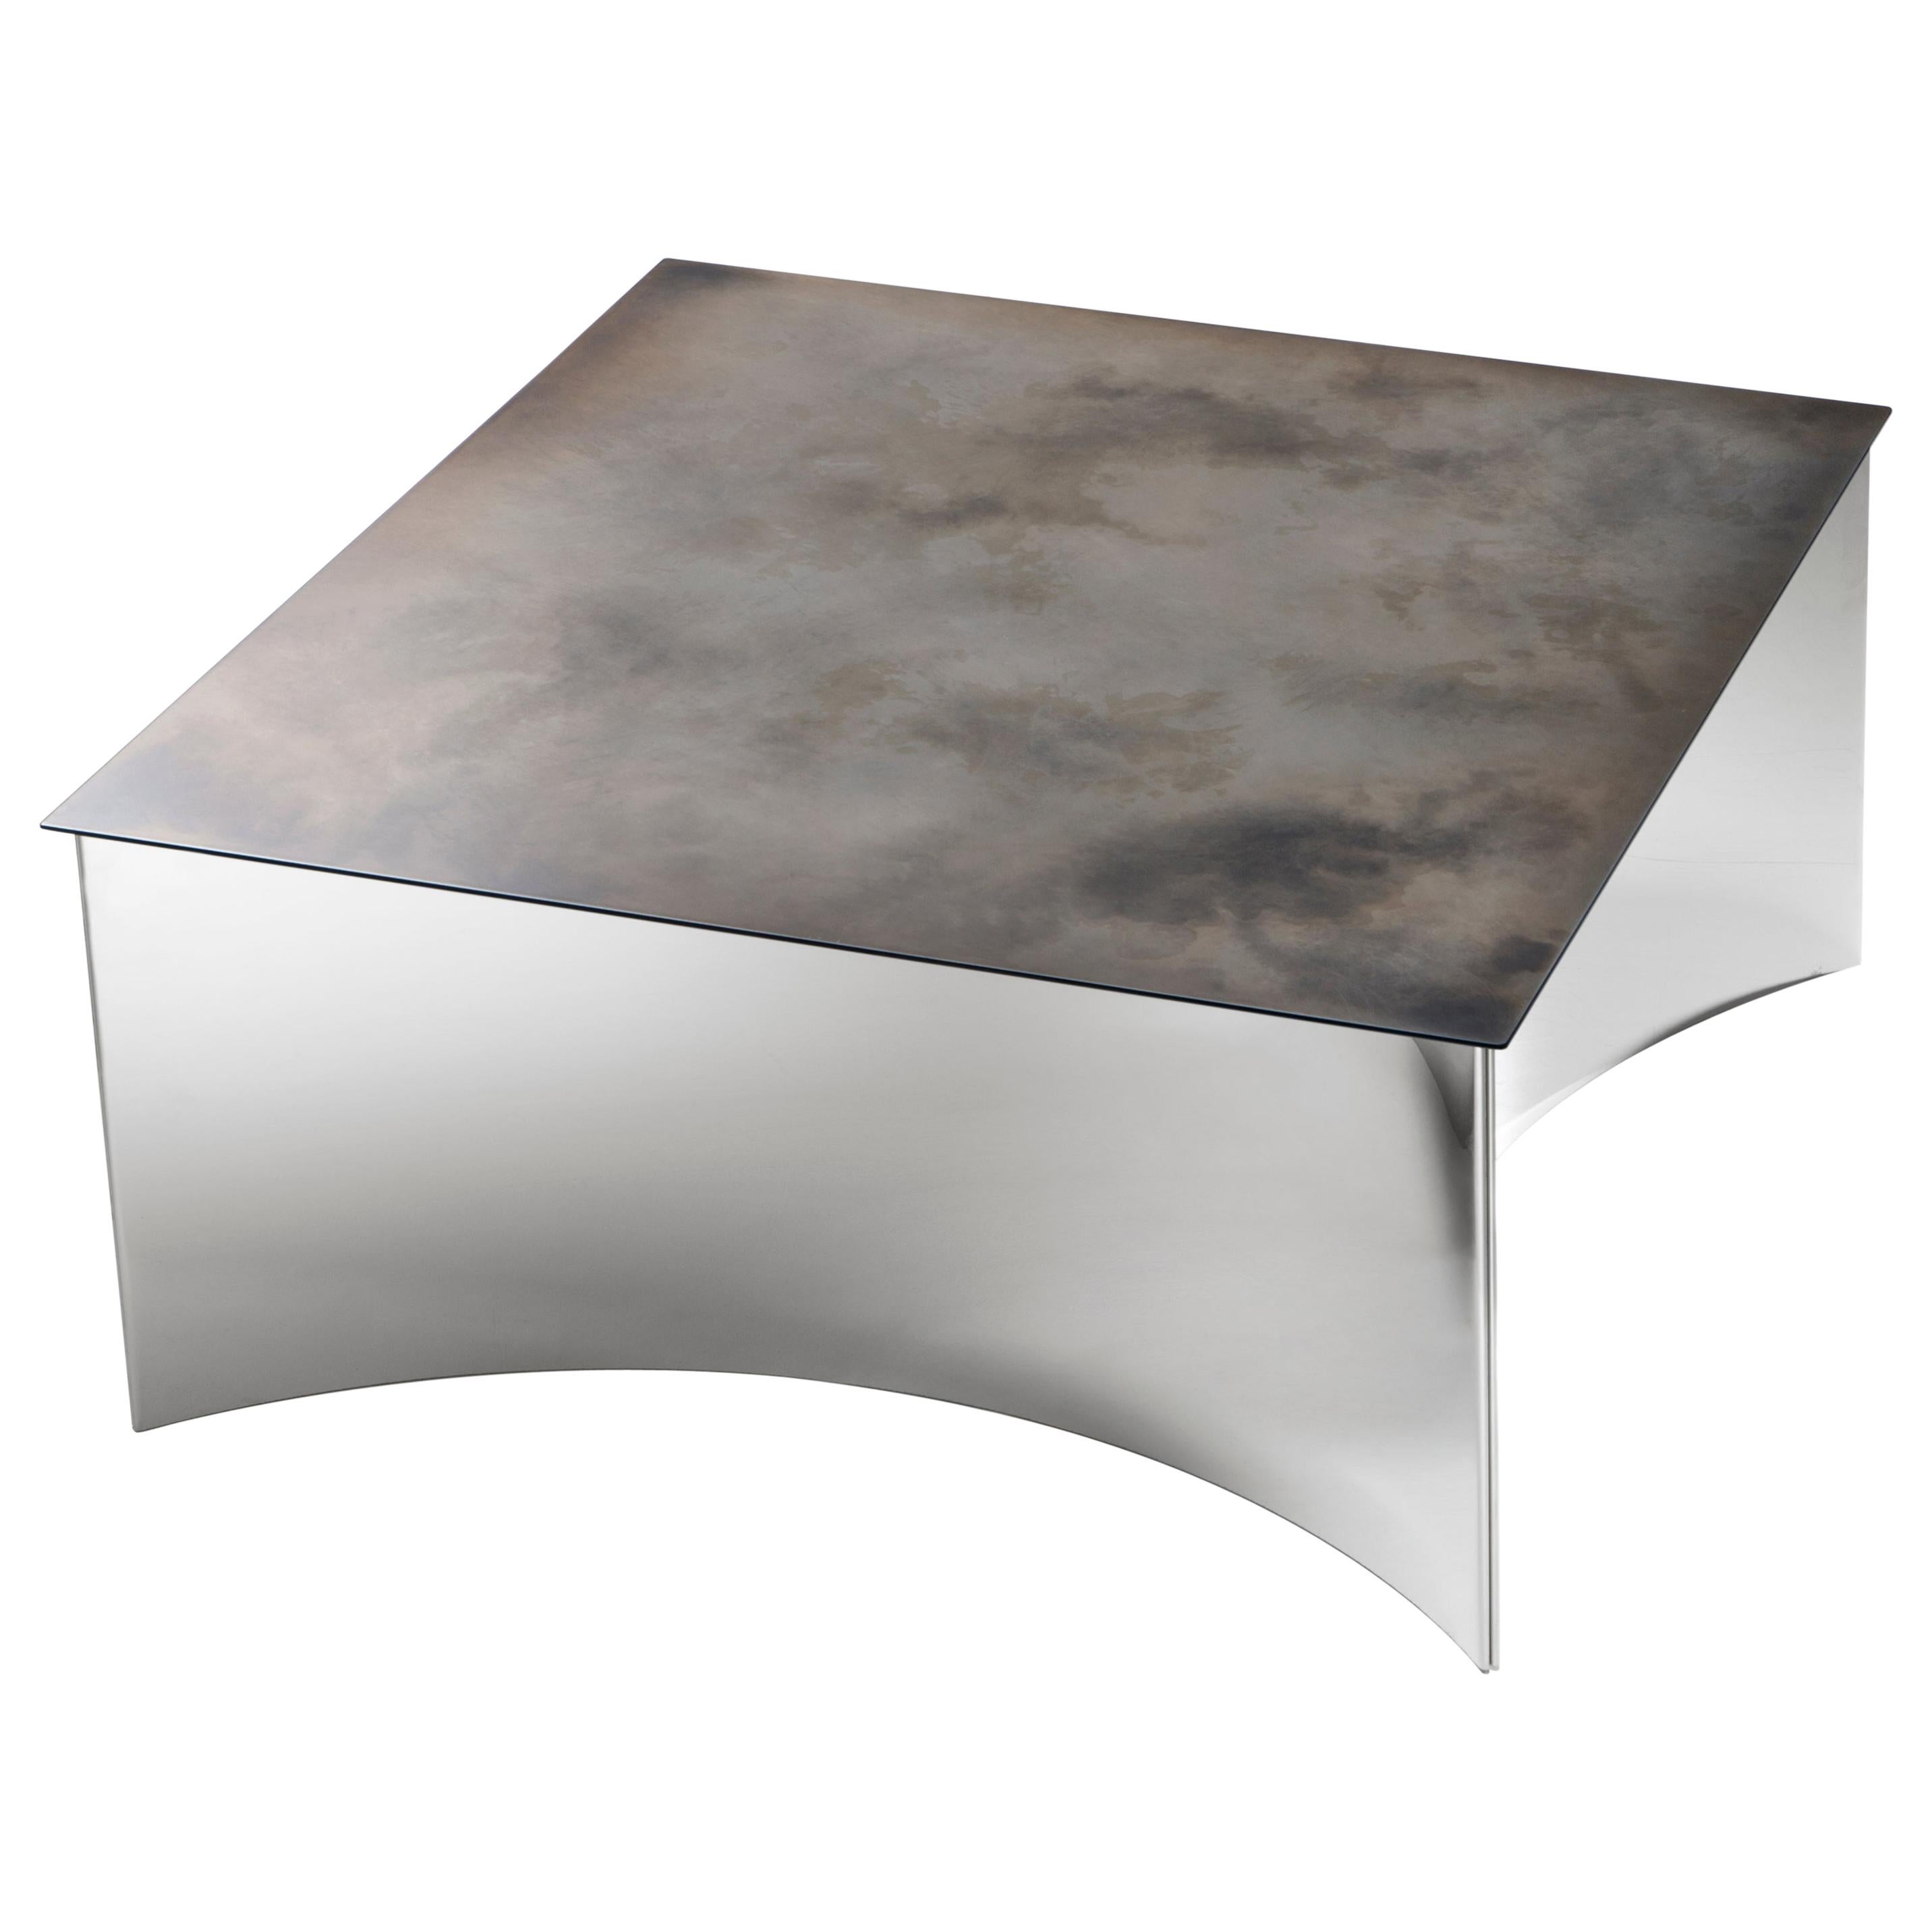 DeCastelli Alchemy 70 Coffee Table in Iron with Stainless Steel Base by Stormo